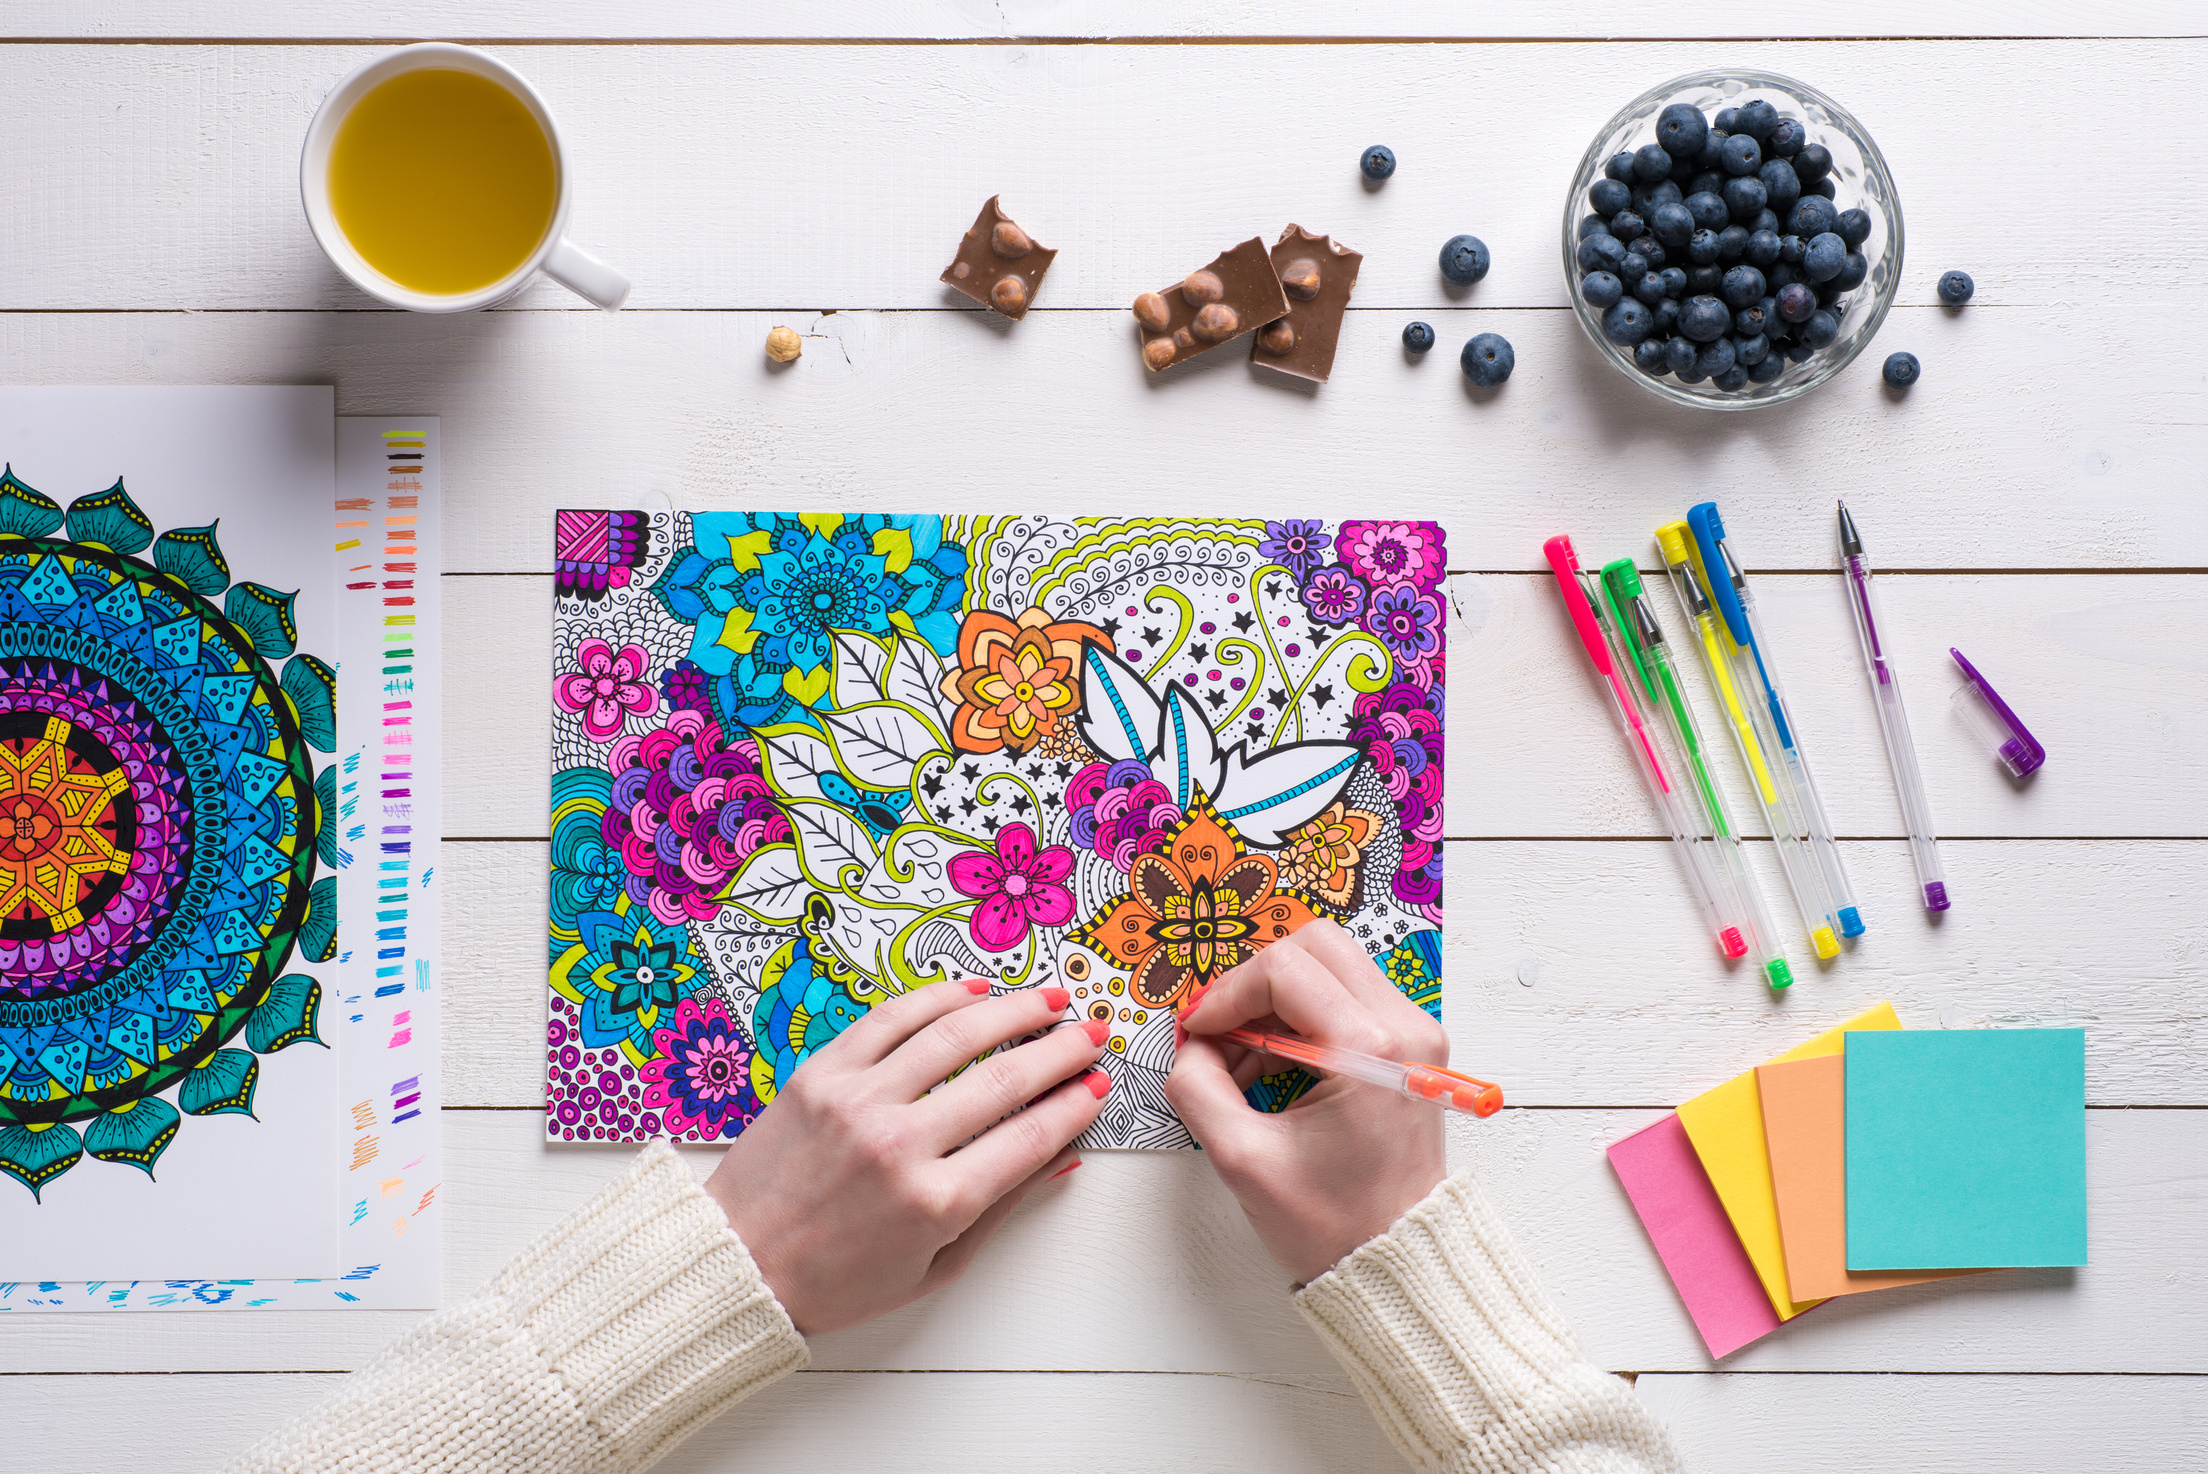 Female coloring adult coloring books, new stress relieving trend